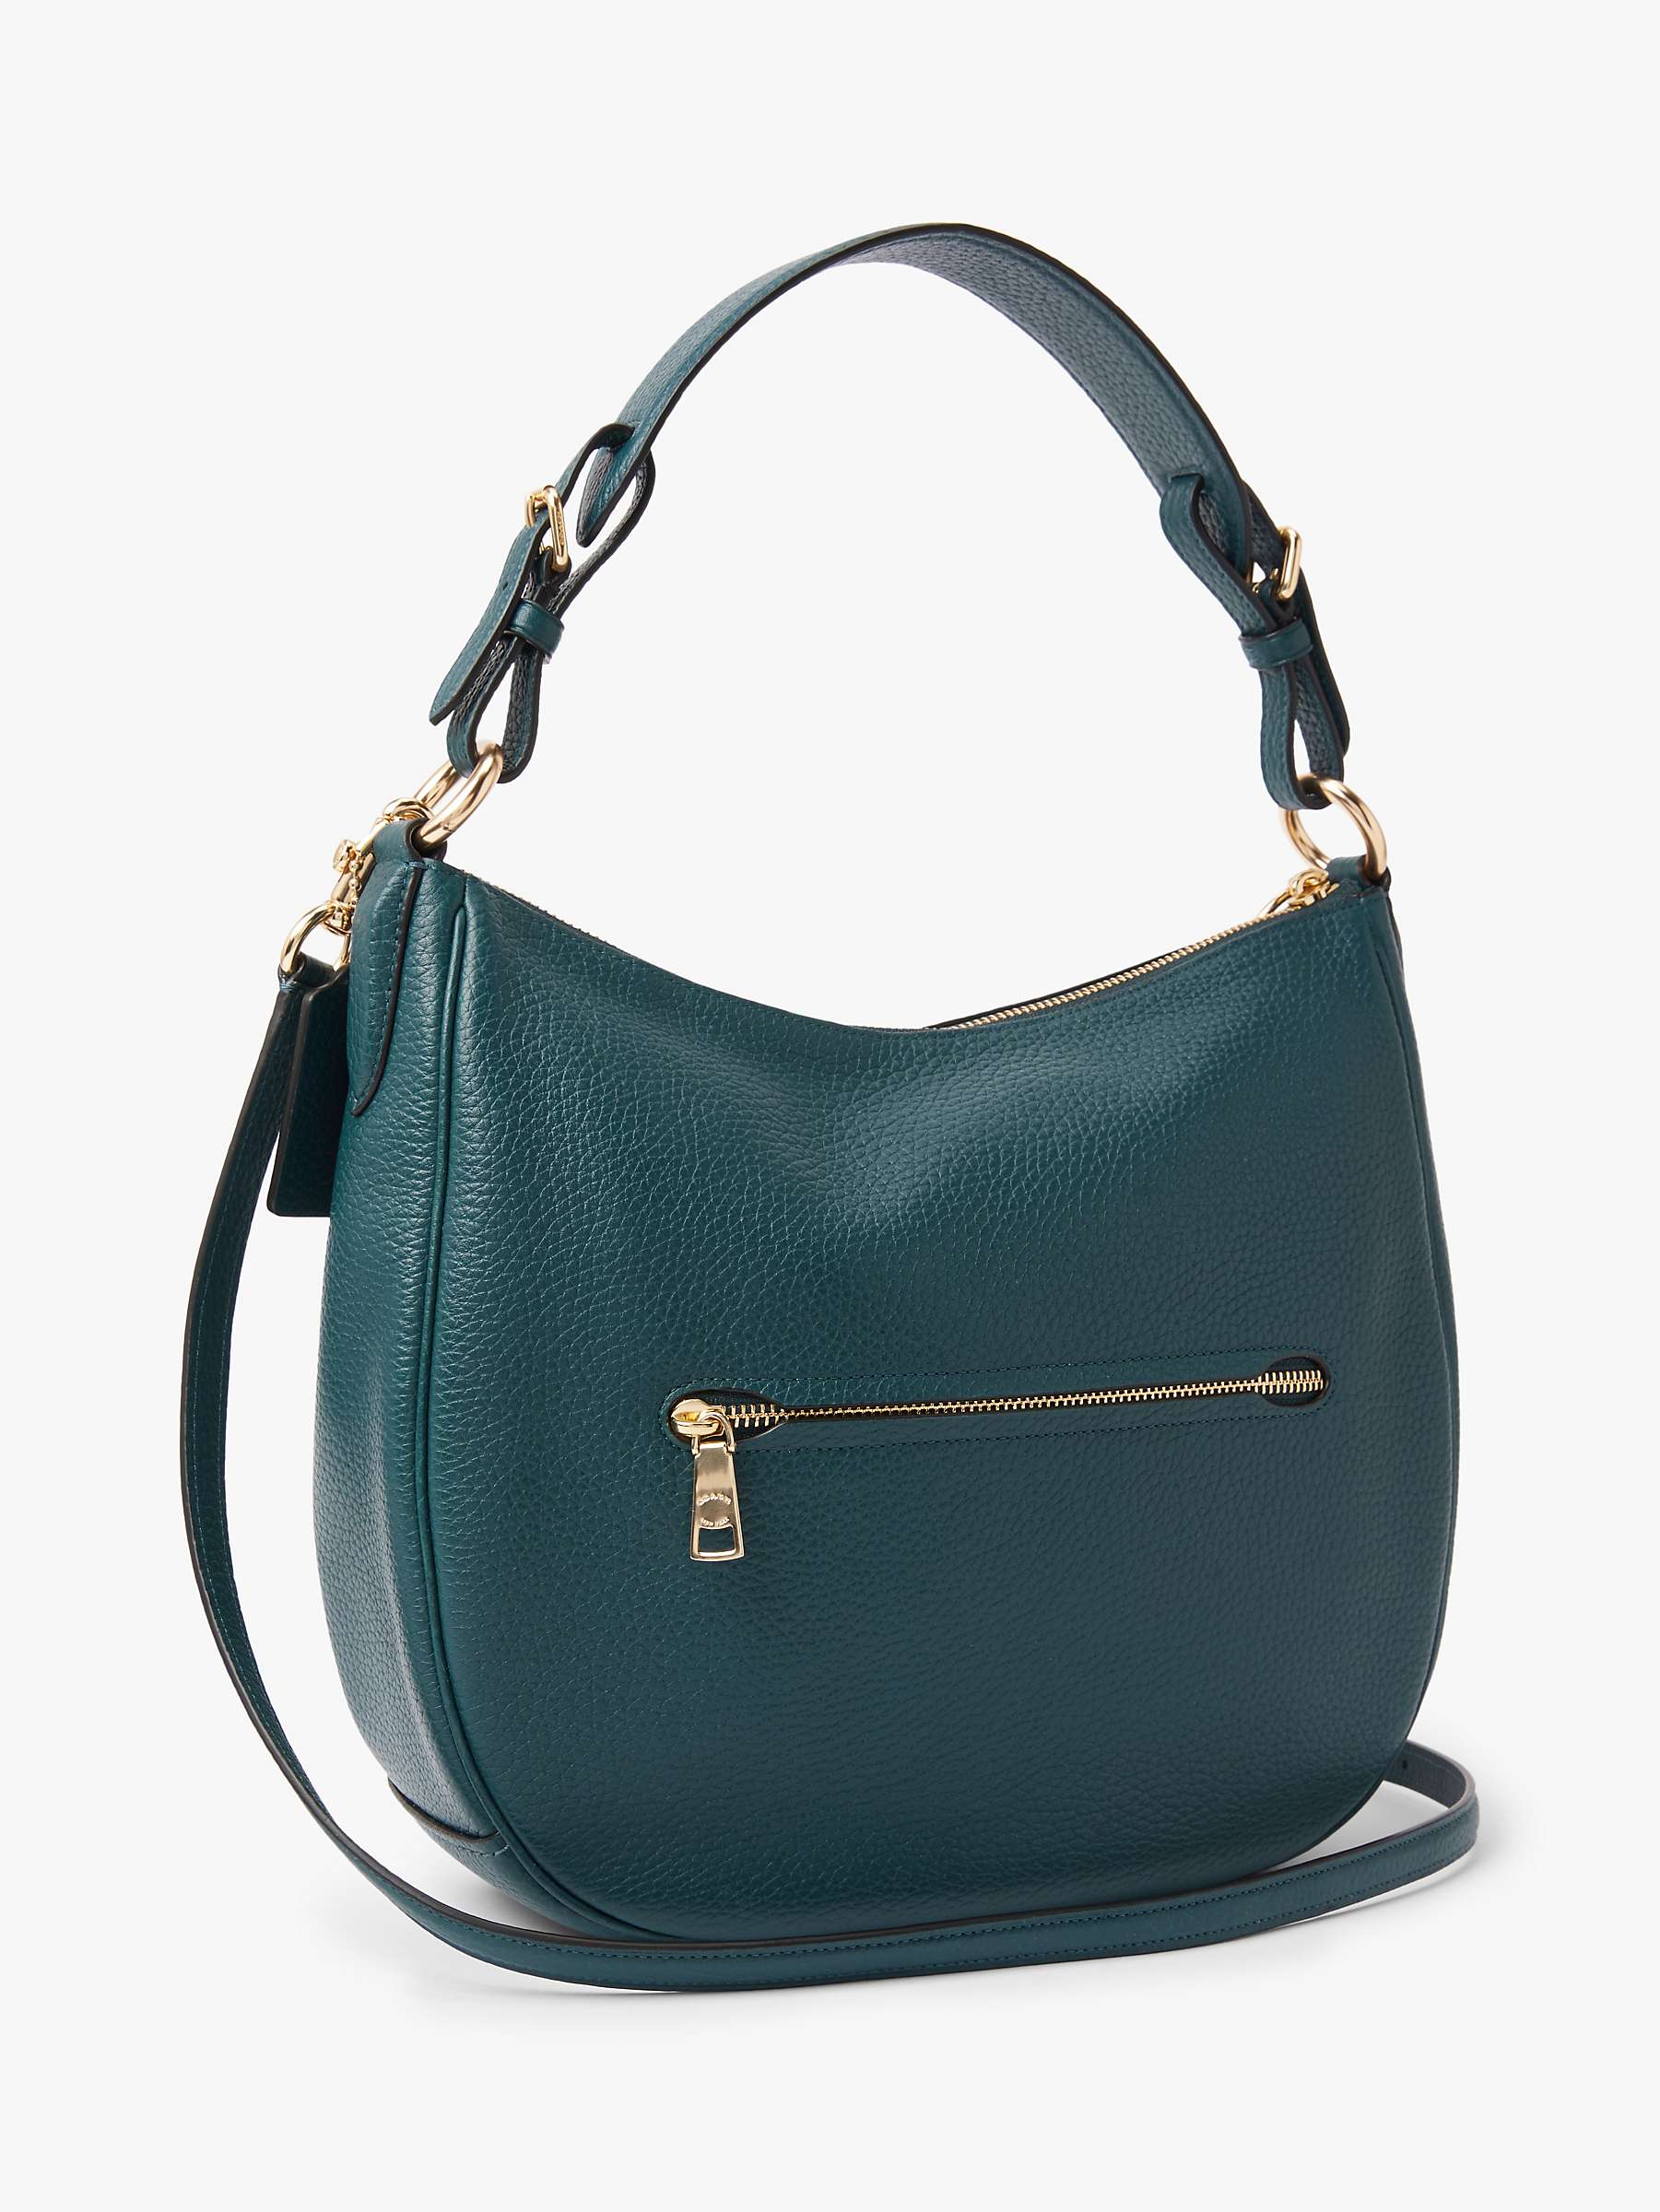 Coach Sutton Pebbled Leather Hobo Bag, Peacock at John Lewis & Partners